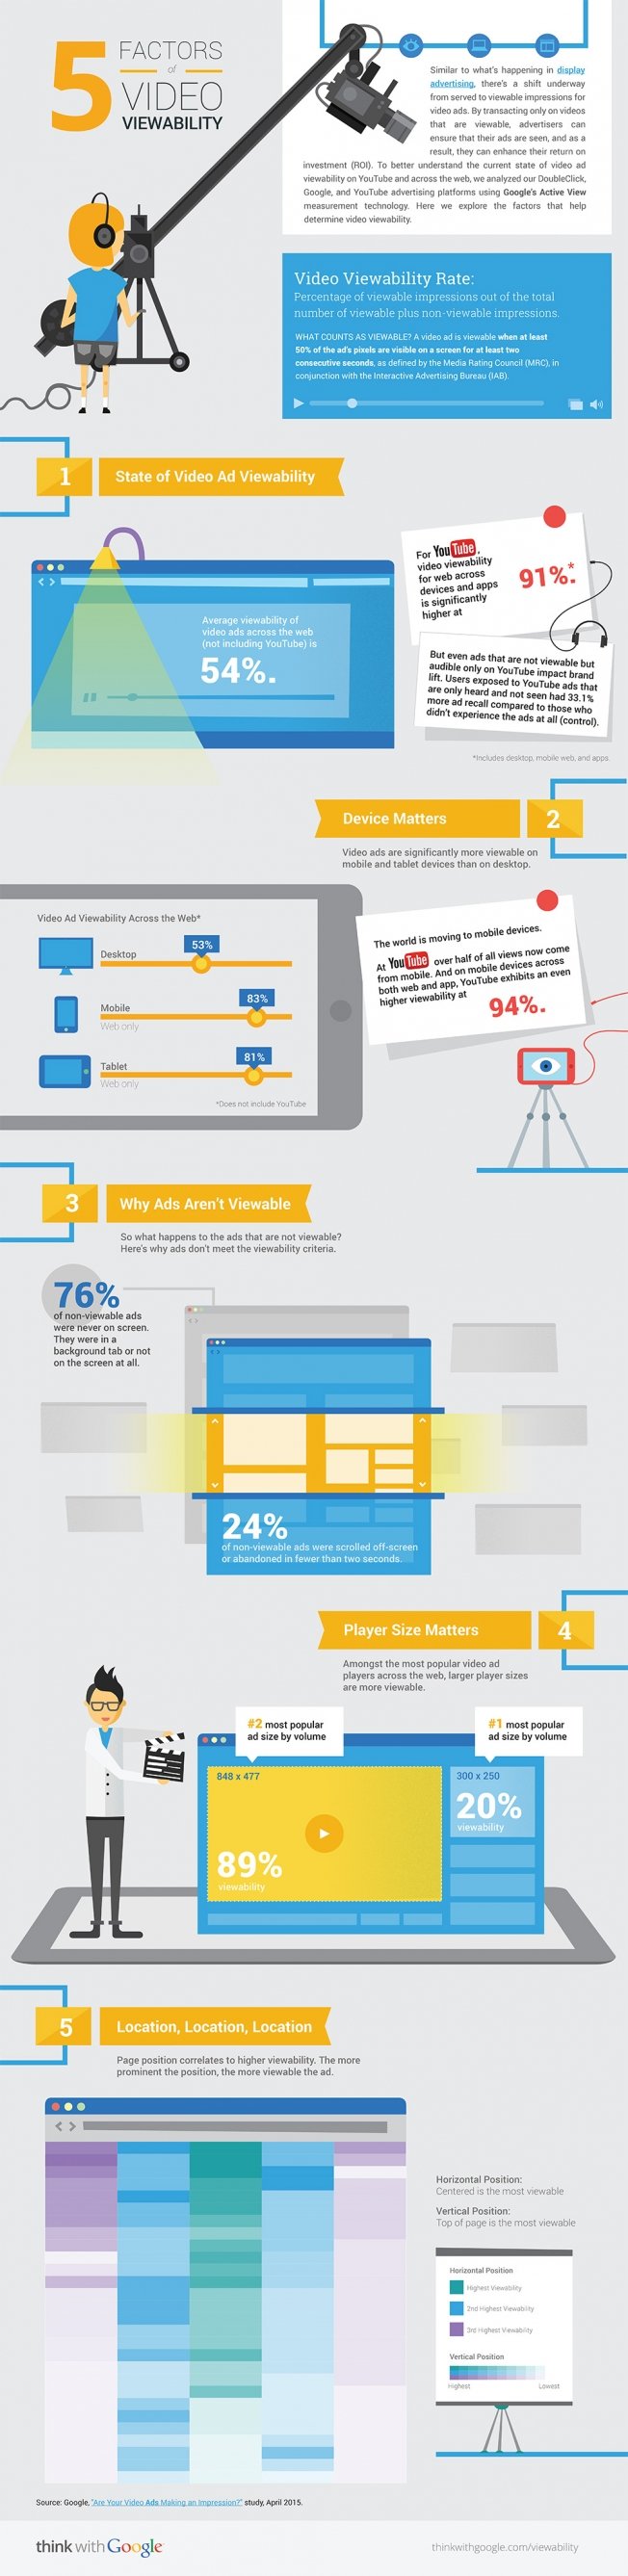 Infographic about video viewability